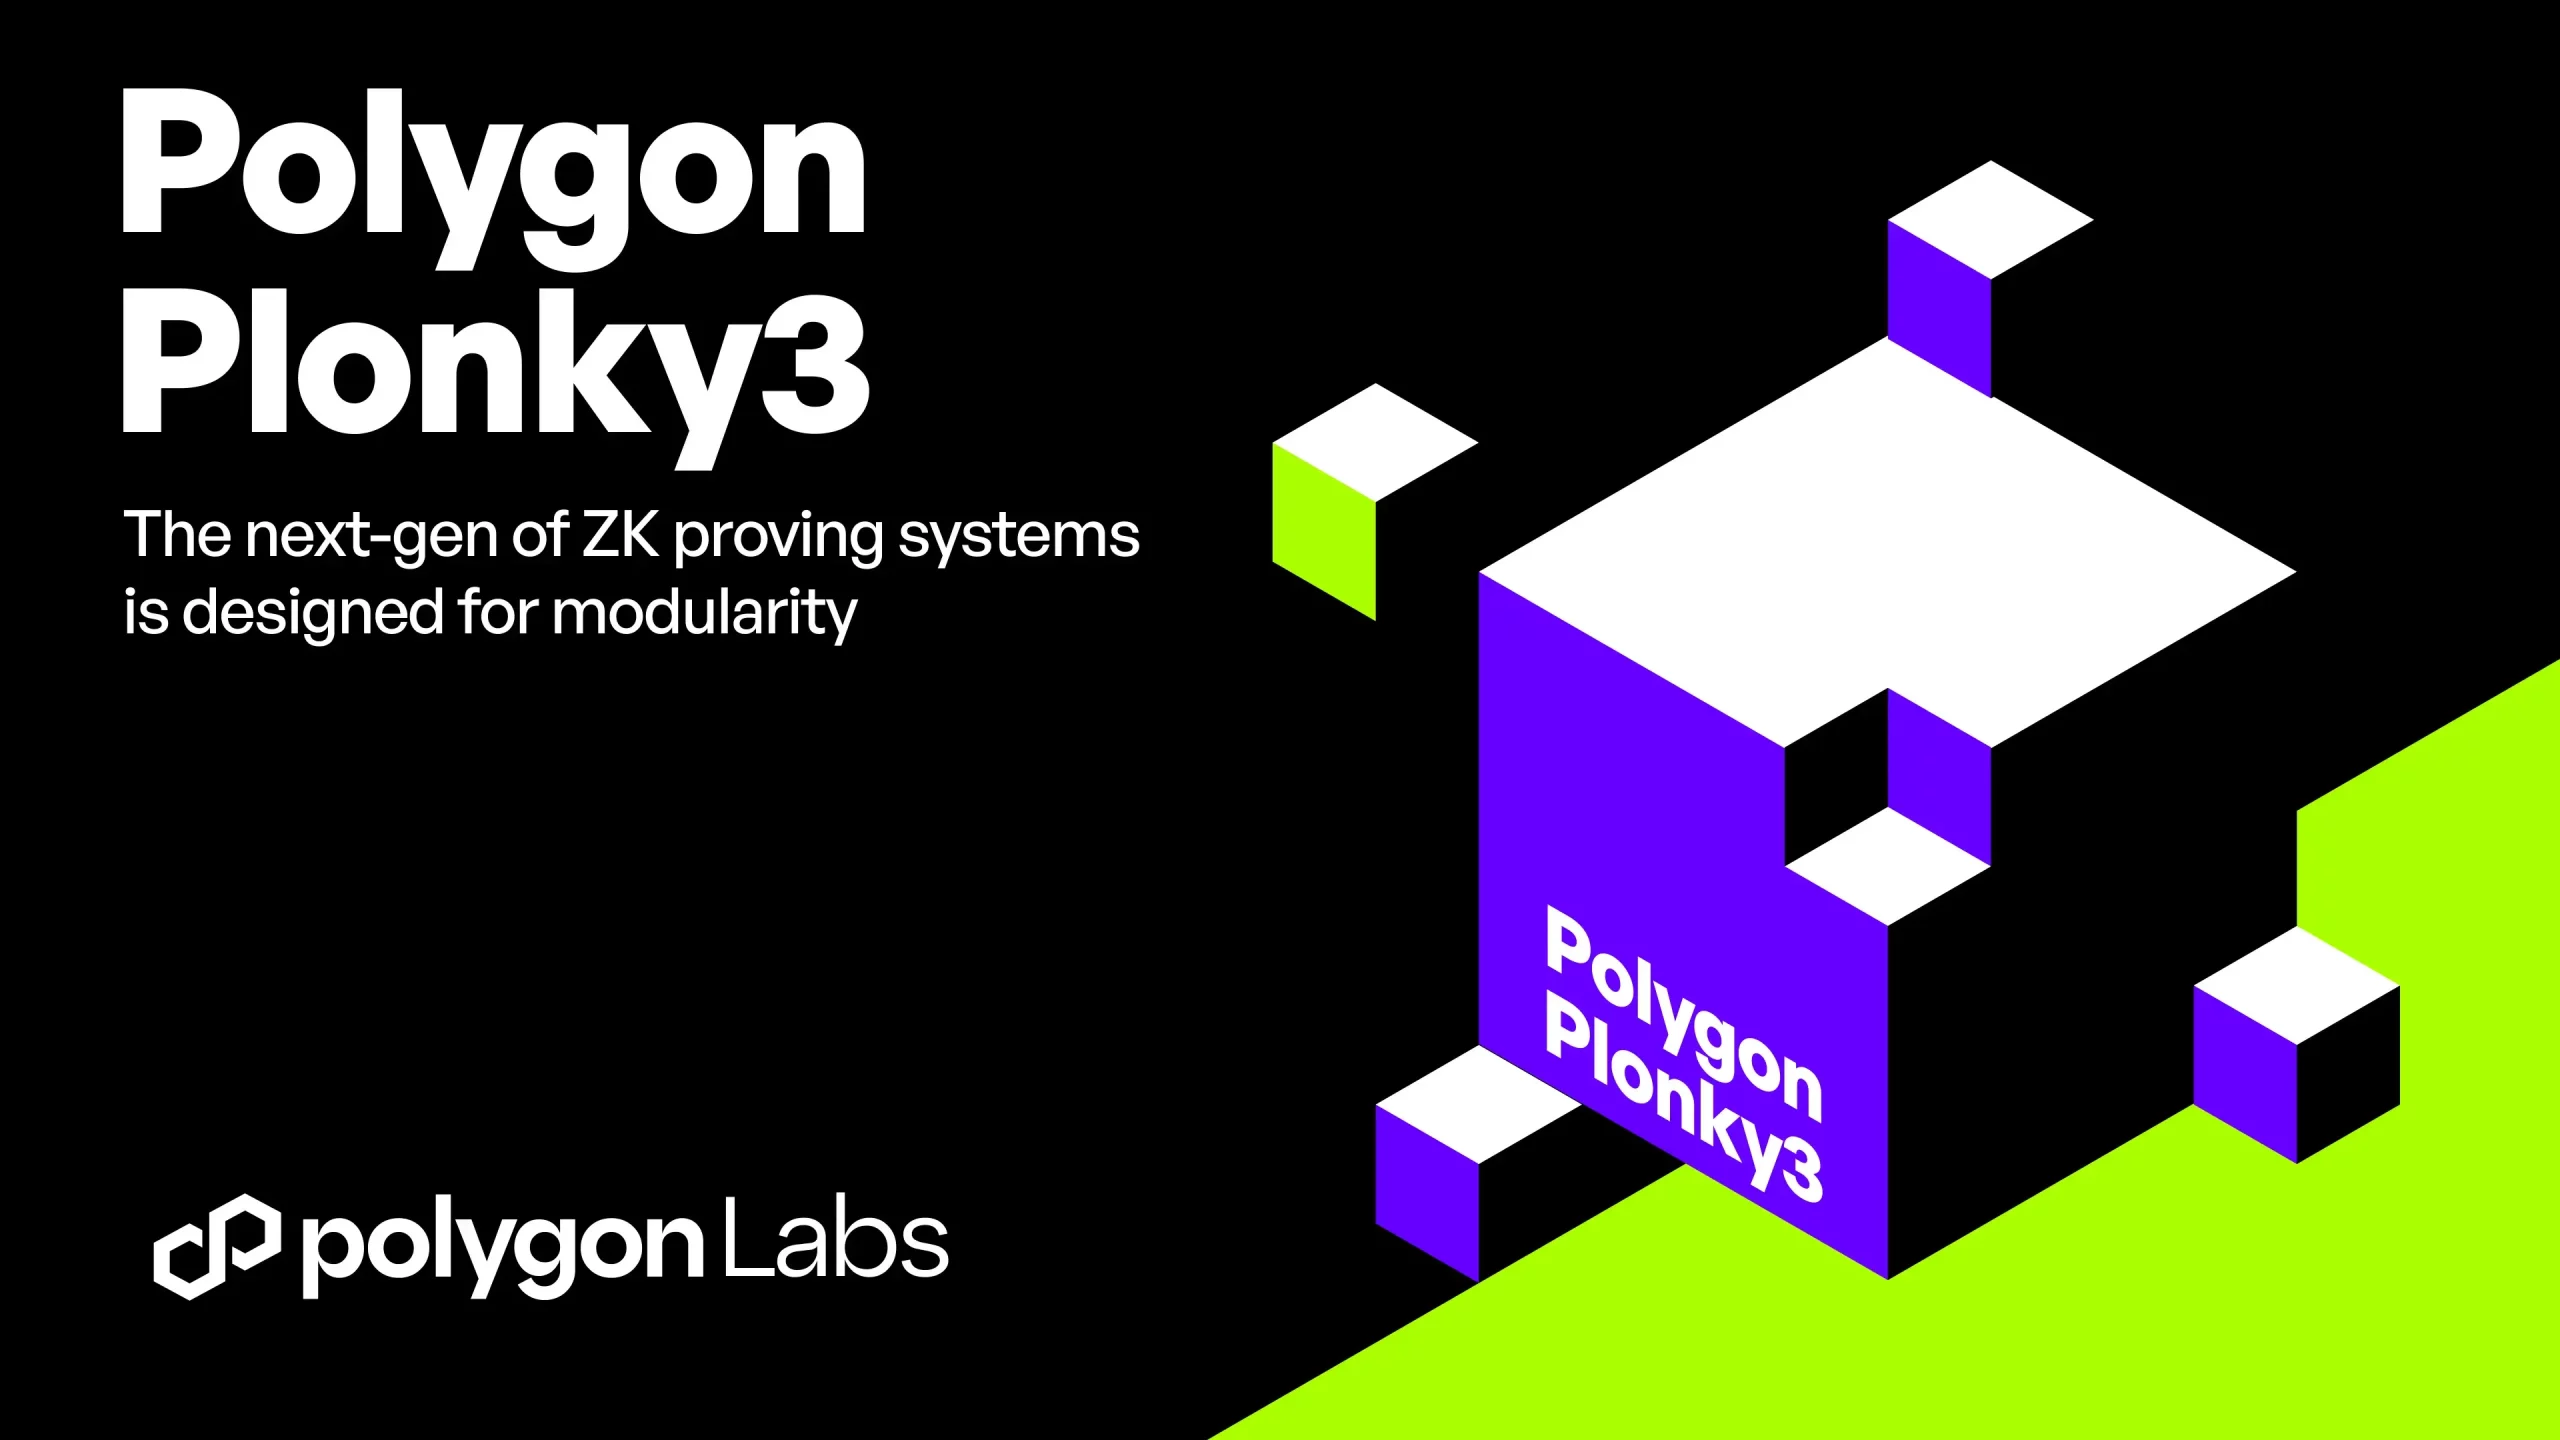 6. Polygon Launched Upgraded ZK Proving System Plonky3